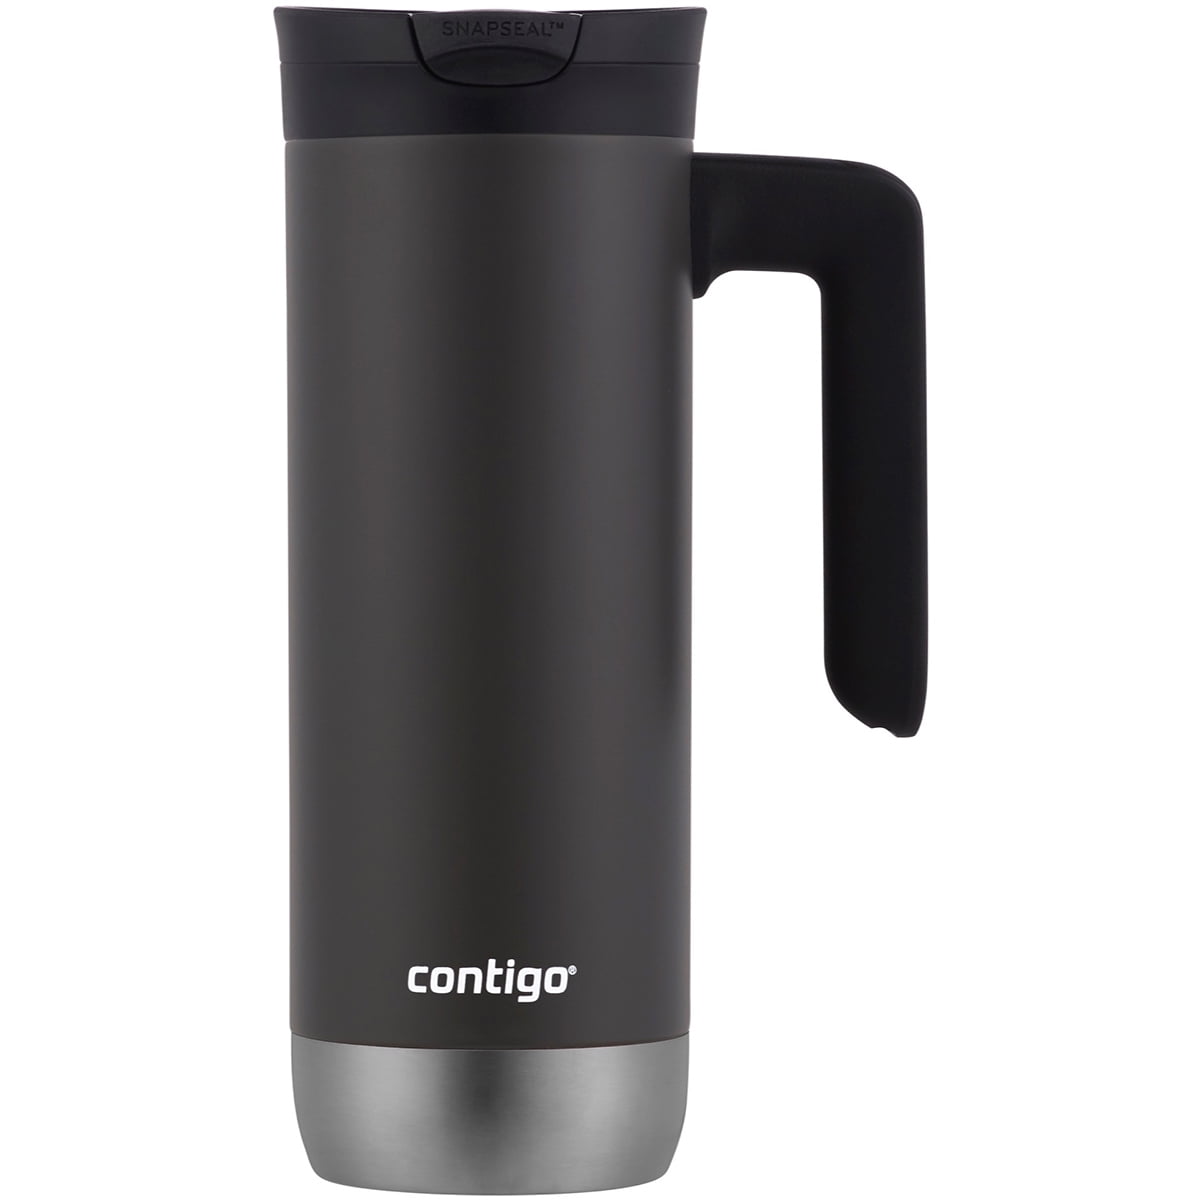 Dropship Contigo Huron 2.0 Stainless Steel Travel Mug With SNAPSEAL Lid And  Handle In Black, 20 Fl Oz. to Sell Online at a Lower Price